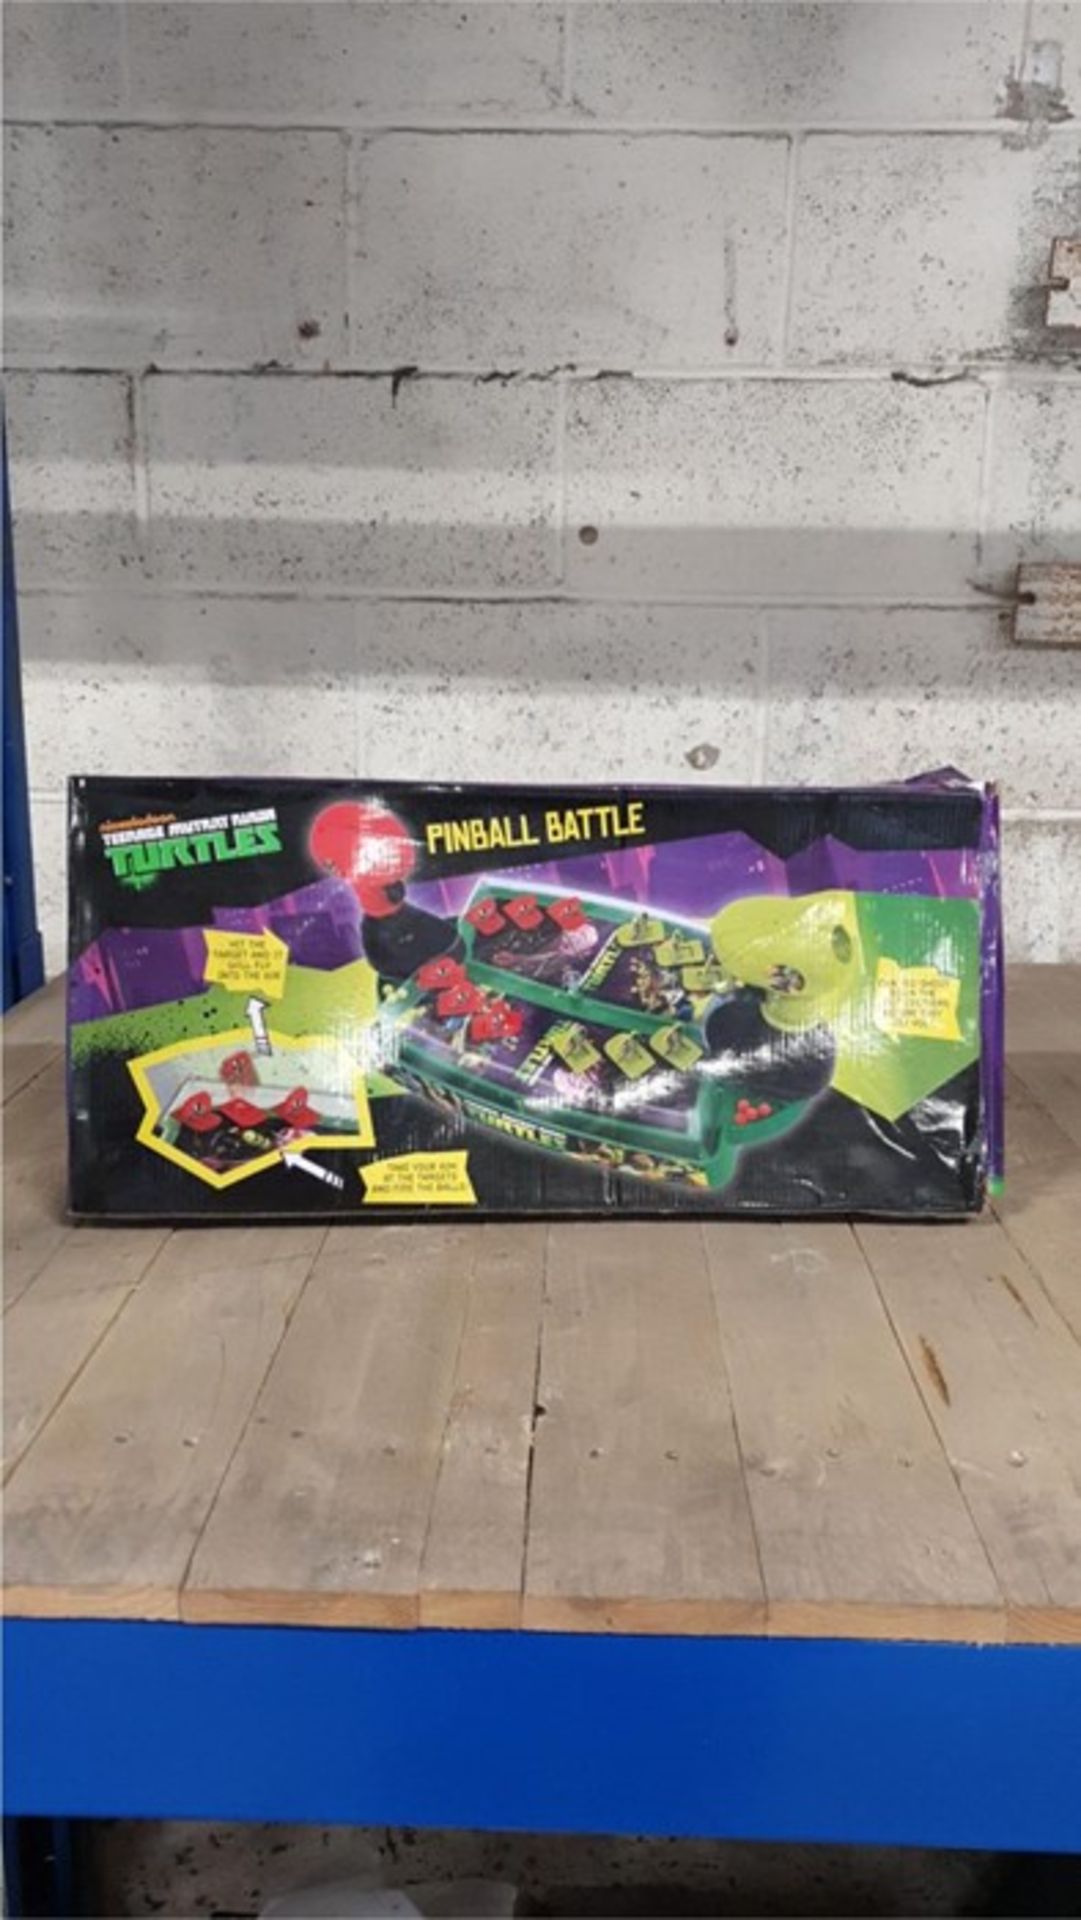 1 BOXED NICKELODEON TEENAGE MUTANT NINJA TURTLES PINBALL BATTLE (VIEWING HIGHLY RECOMMENDED)